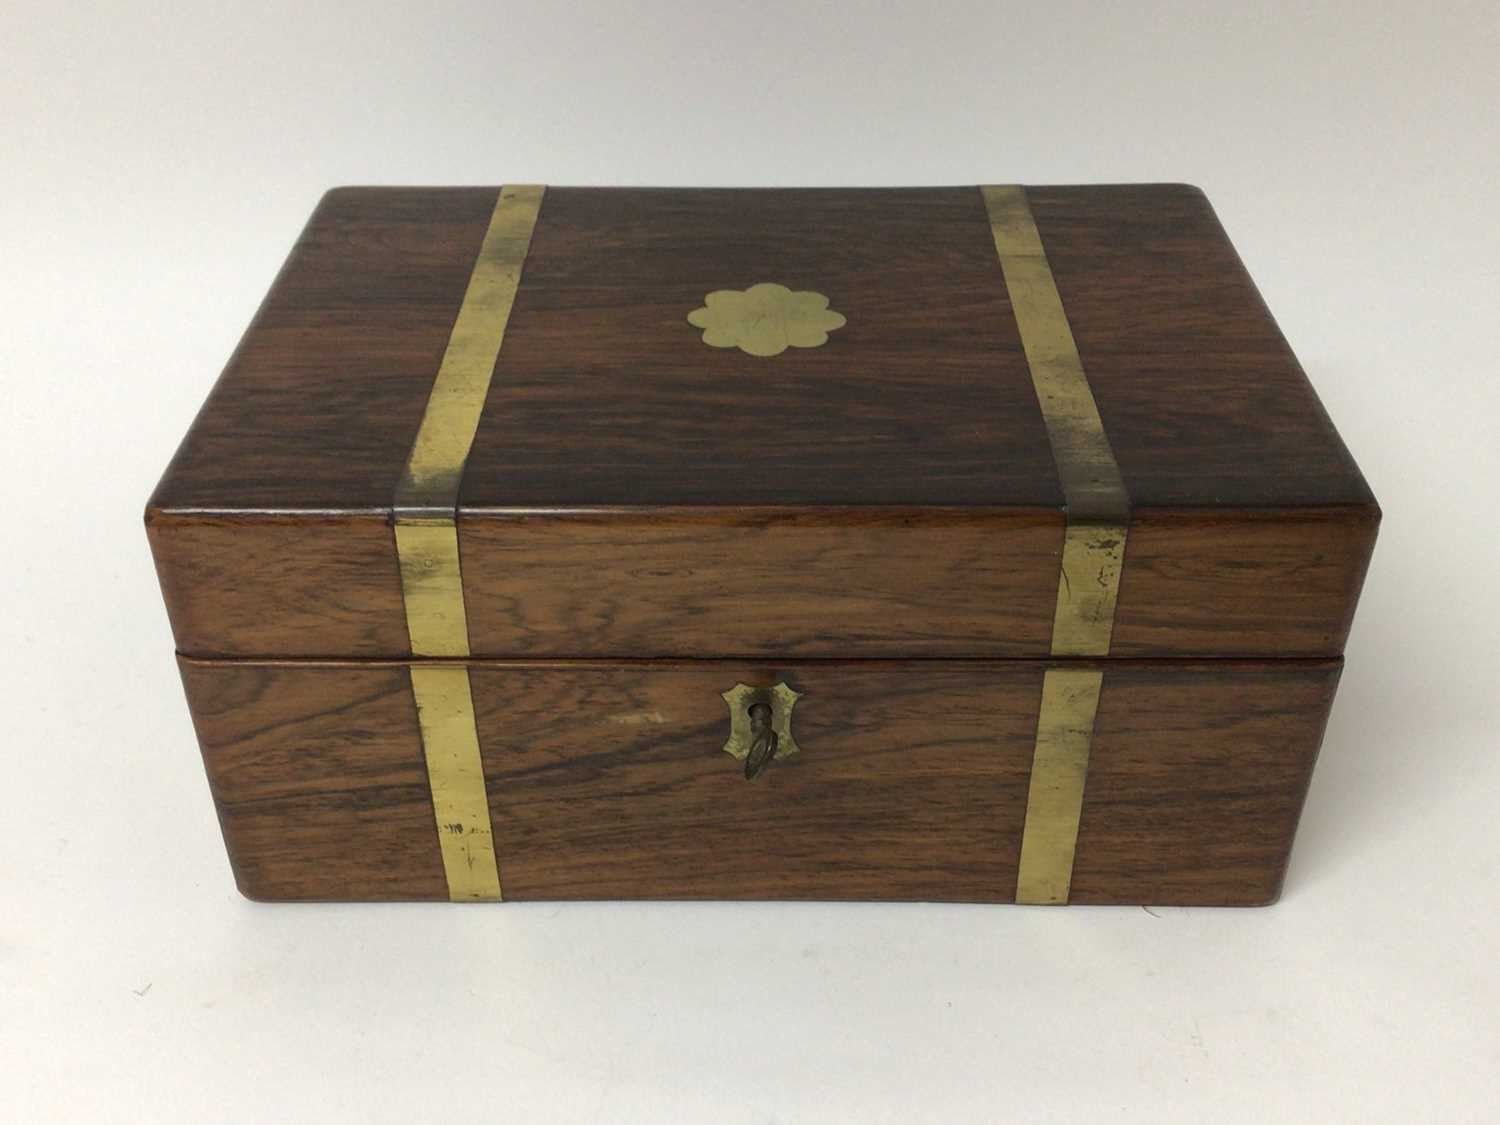 19th century brass bound rosewood writing box with fitted interior